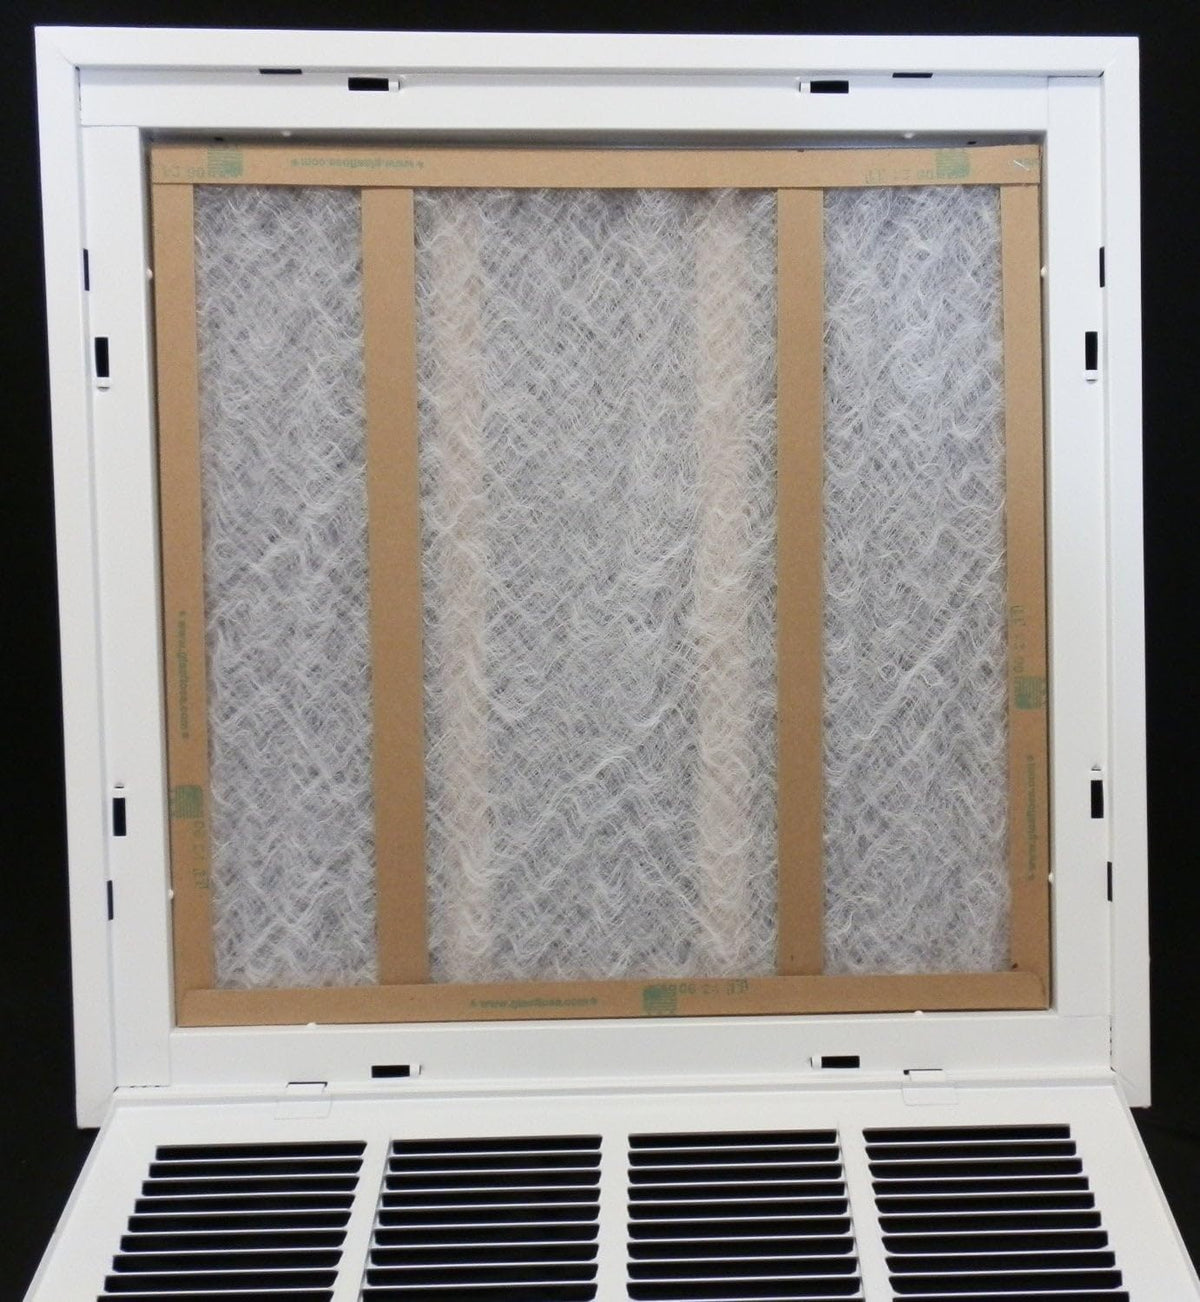 26&quot; X 32&quot; Steel Return Air Filter Grille for 1&quot; Filter - Removable Frame - [Outer Dimensions: 28 5/8&quot; X 34 5/8&quot;]